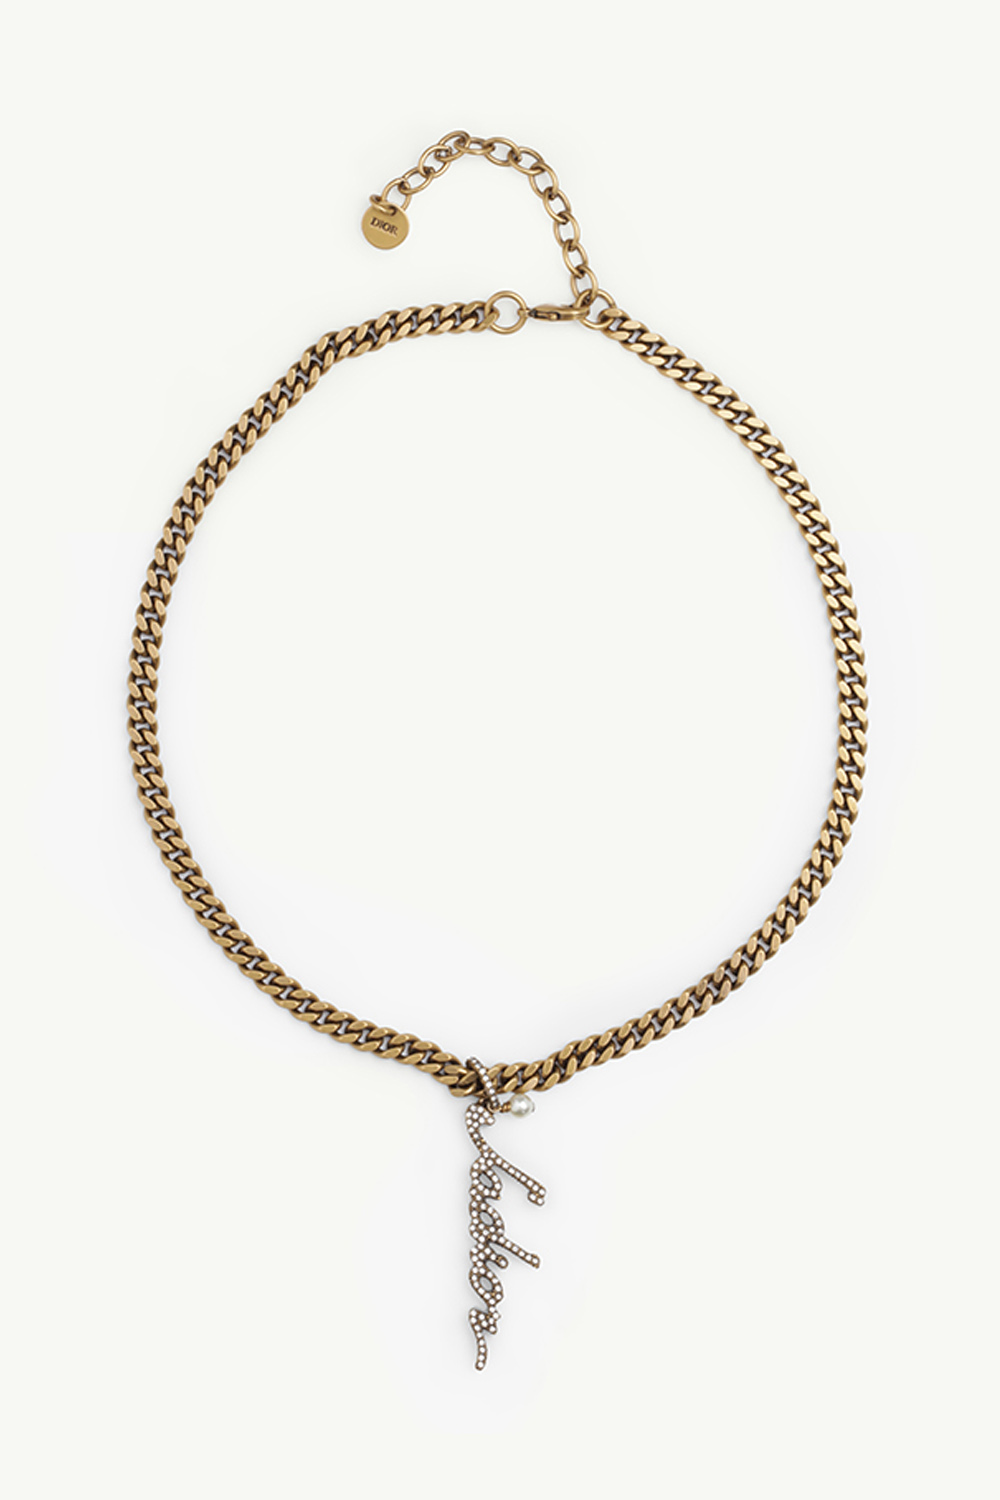 CHRISTIAN DIOR J'adior Signature Chain Necklace Antique Gold Metal with White Resin Pearls and White Crystals 0